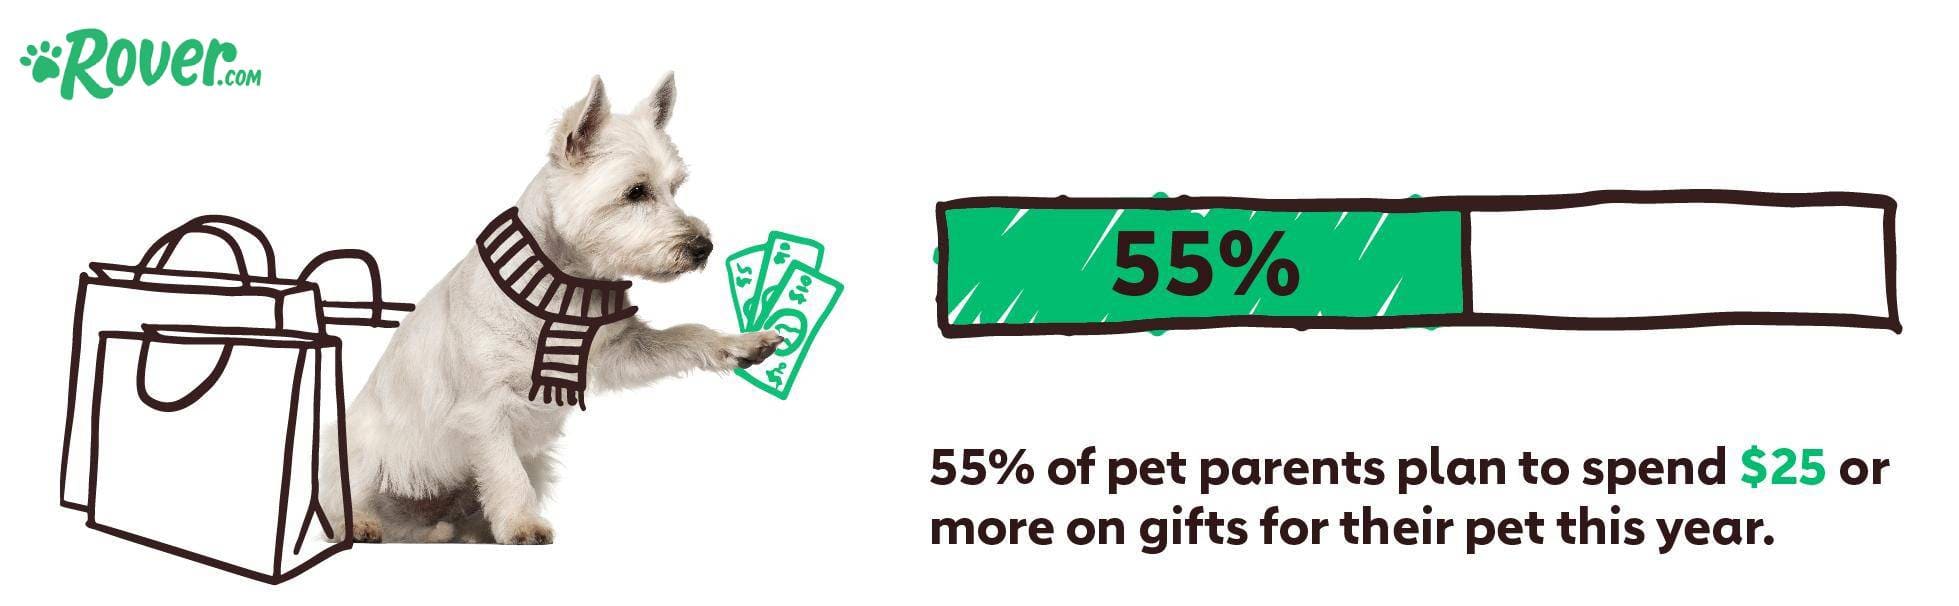 How Much Americans Plan to Spend on Their Pets During 2019 Holiday Shopping Season, Rover.com, holiday shopping statistics 2019, pet industry statistics and trends 2019, trends in online purchasing of pet products during holiday shopping season, pet industry trends 2019